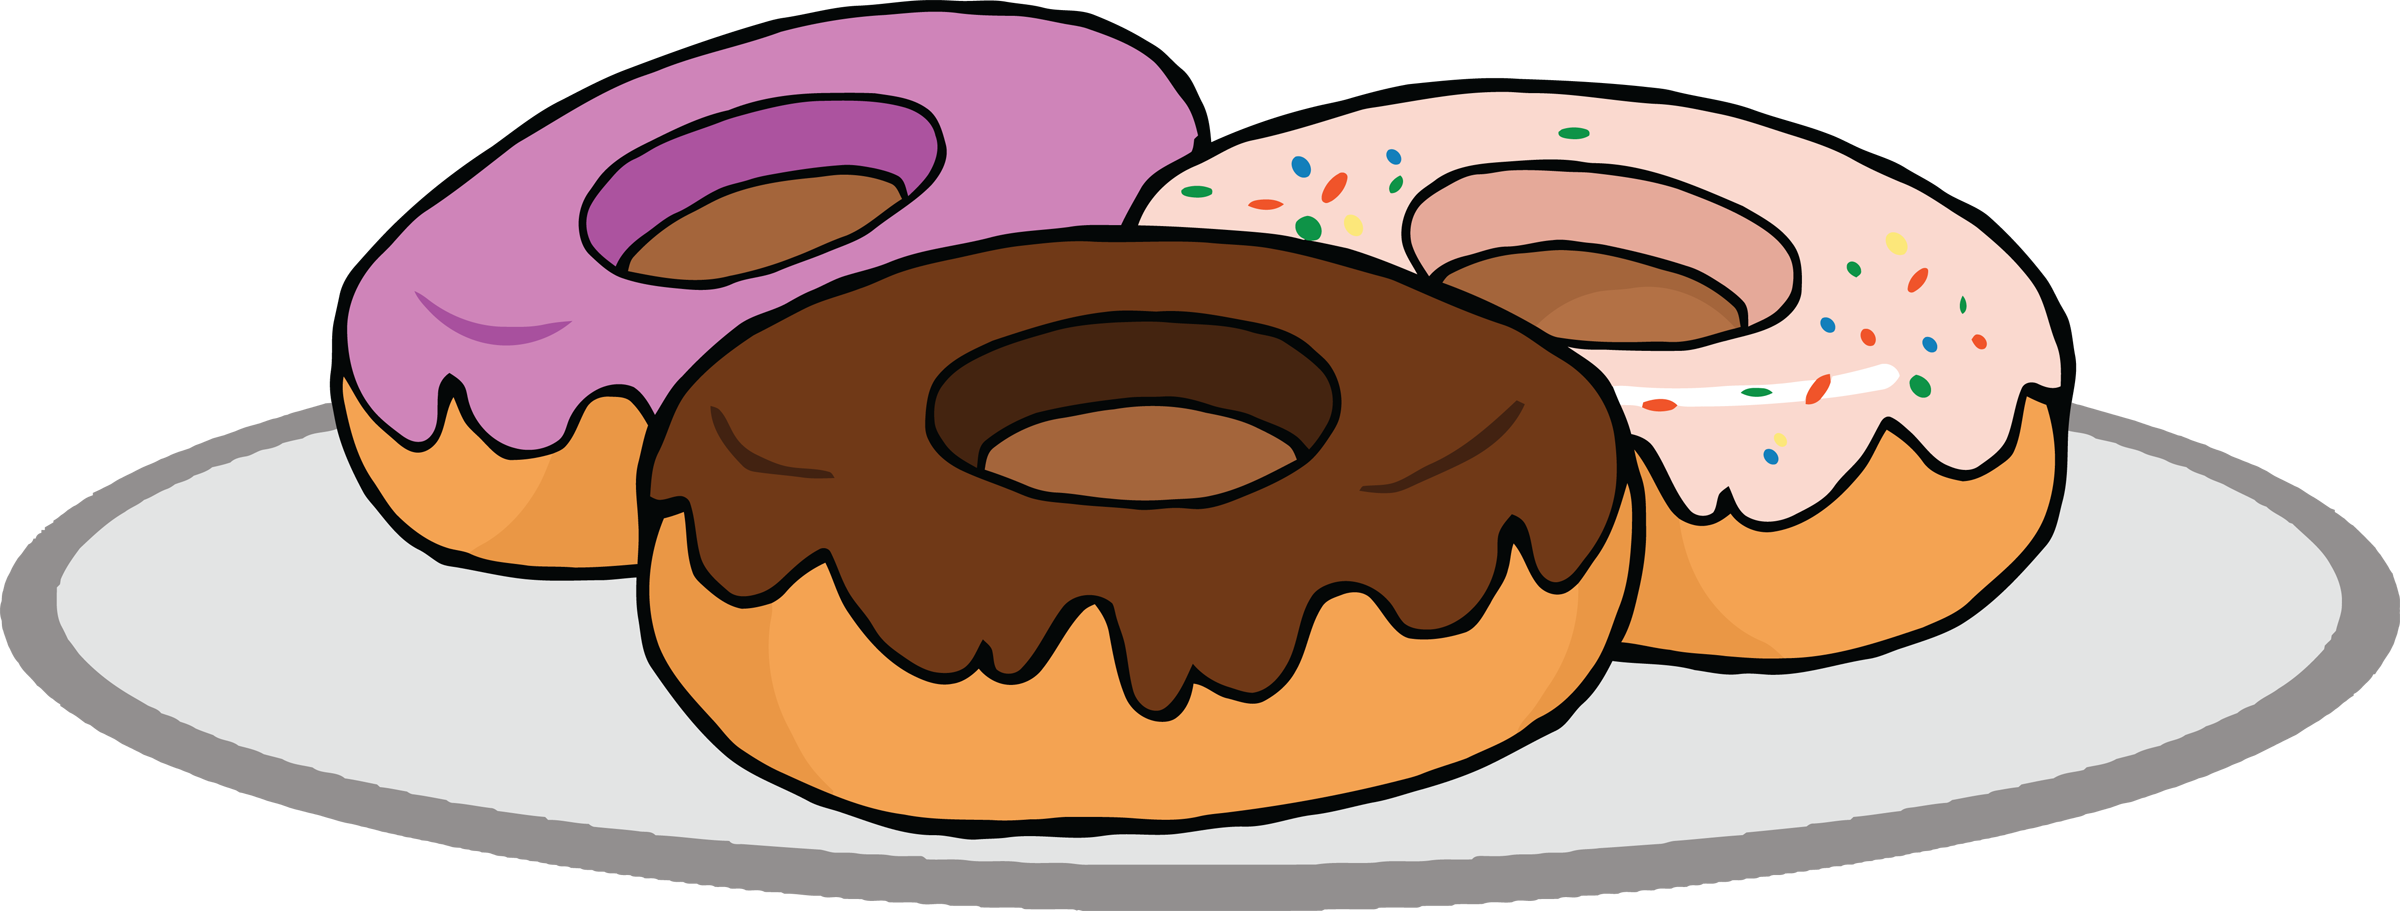 coffee and donuts clipart - photo #17